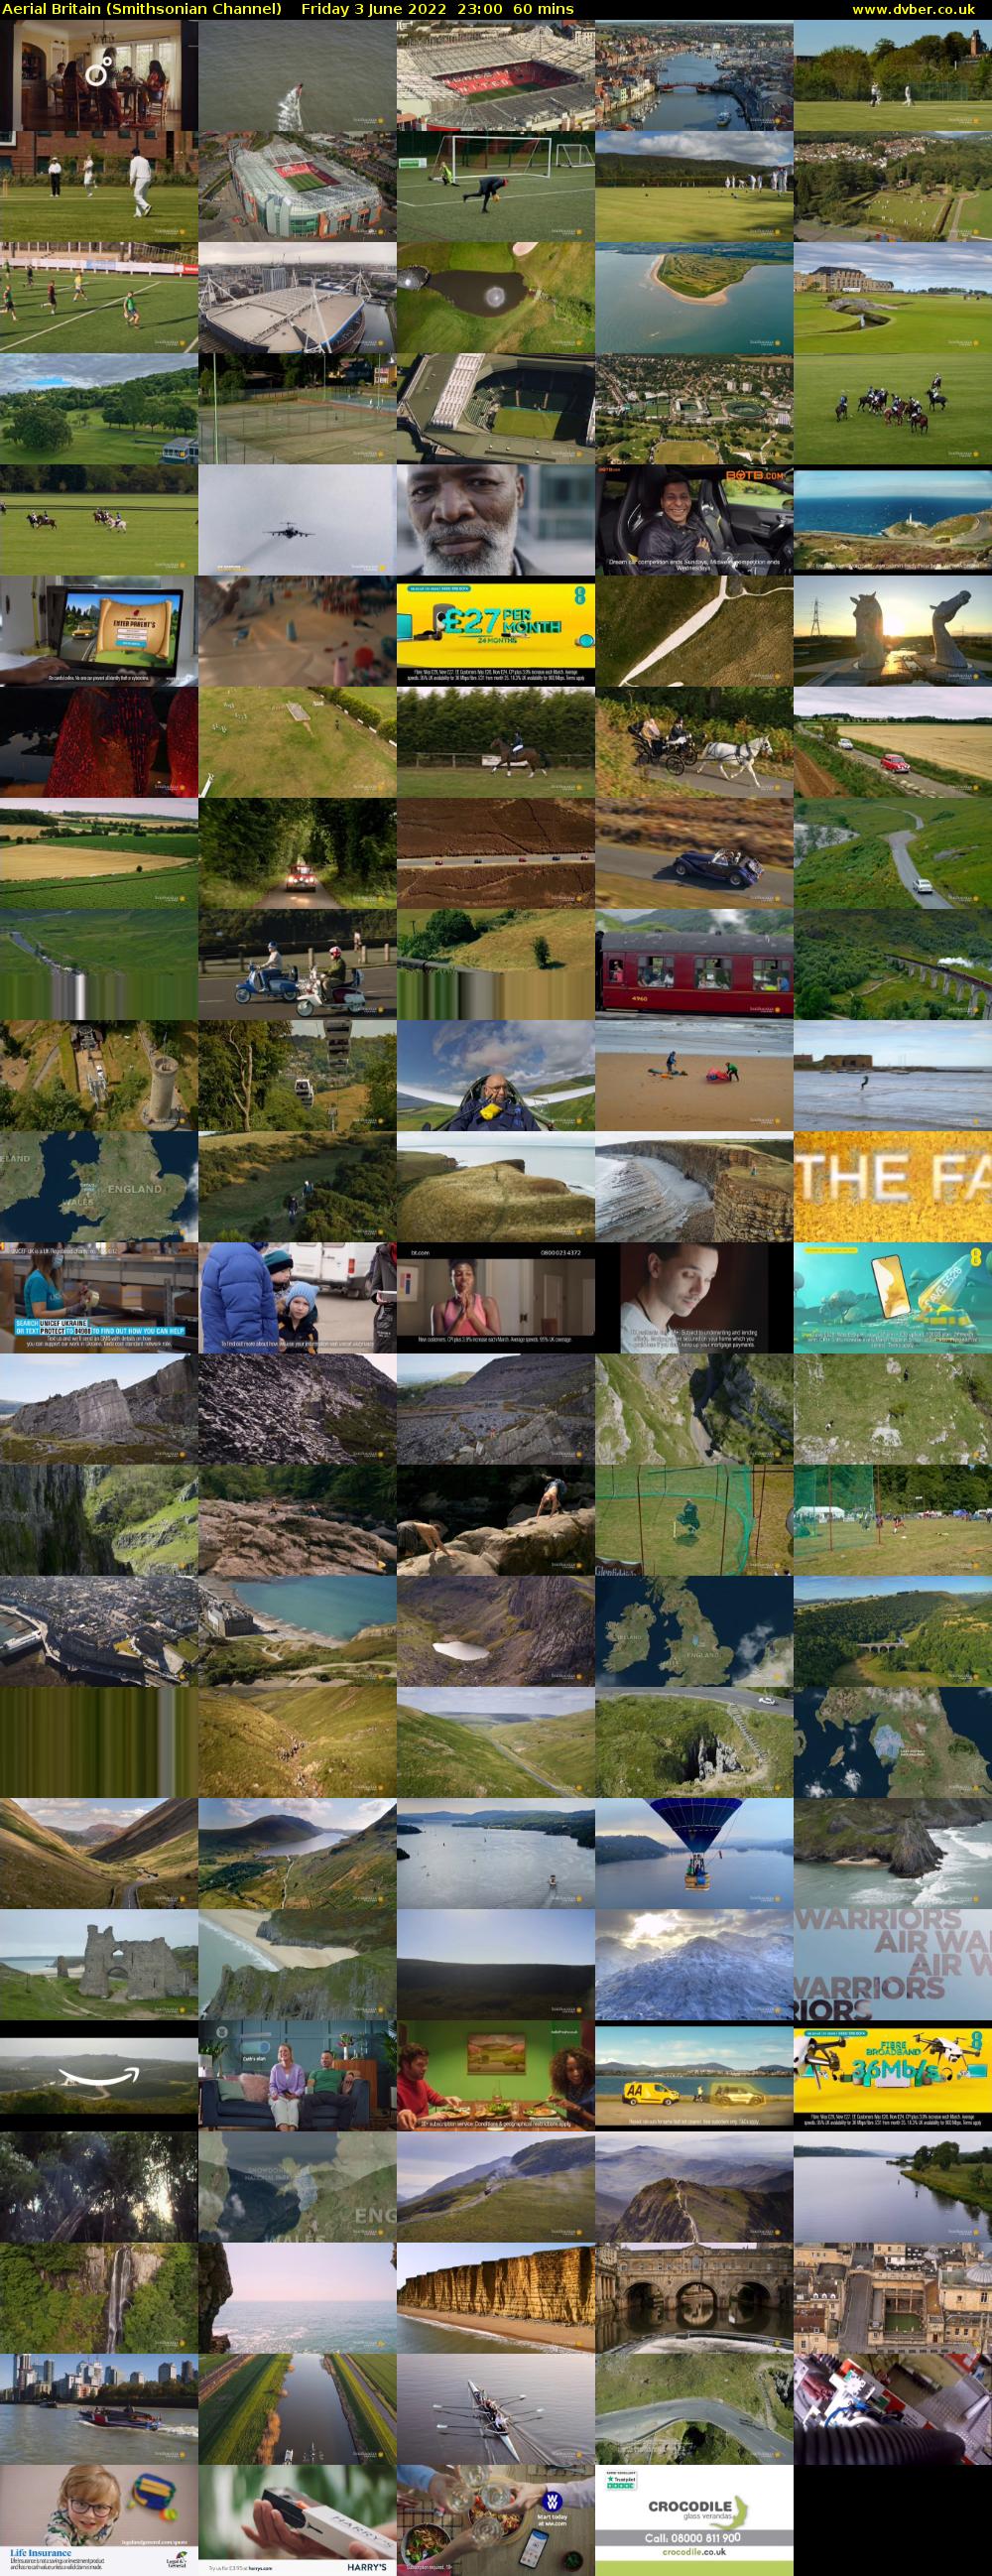 Aerial Britain (Smithsonian Channel) Friday 3 June 2022 23:00 - 00:00